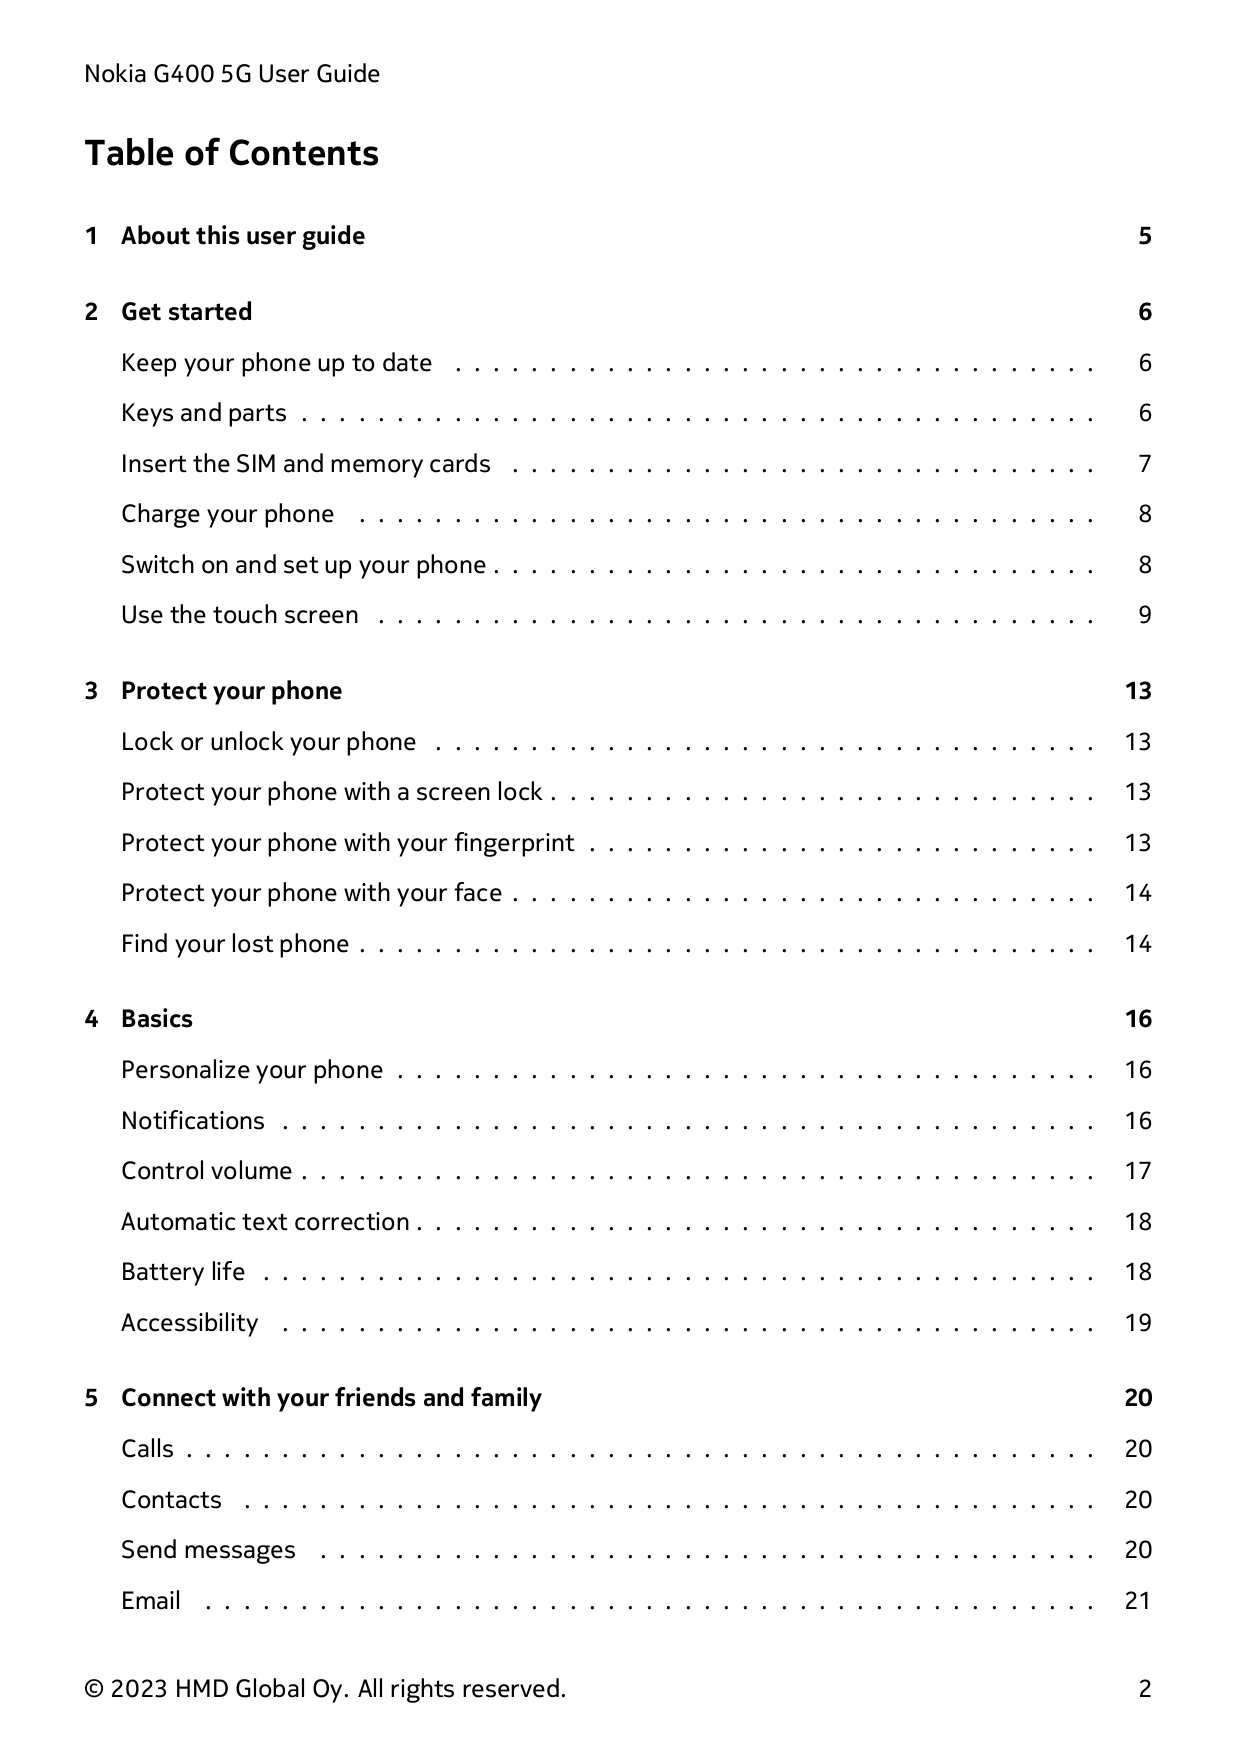 Nokia G400 5G User GuideTable of Contents1 About this user guide52 Get started6Keep your phone up to date . . . . . . . . . . . 